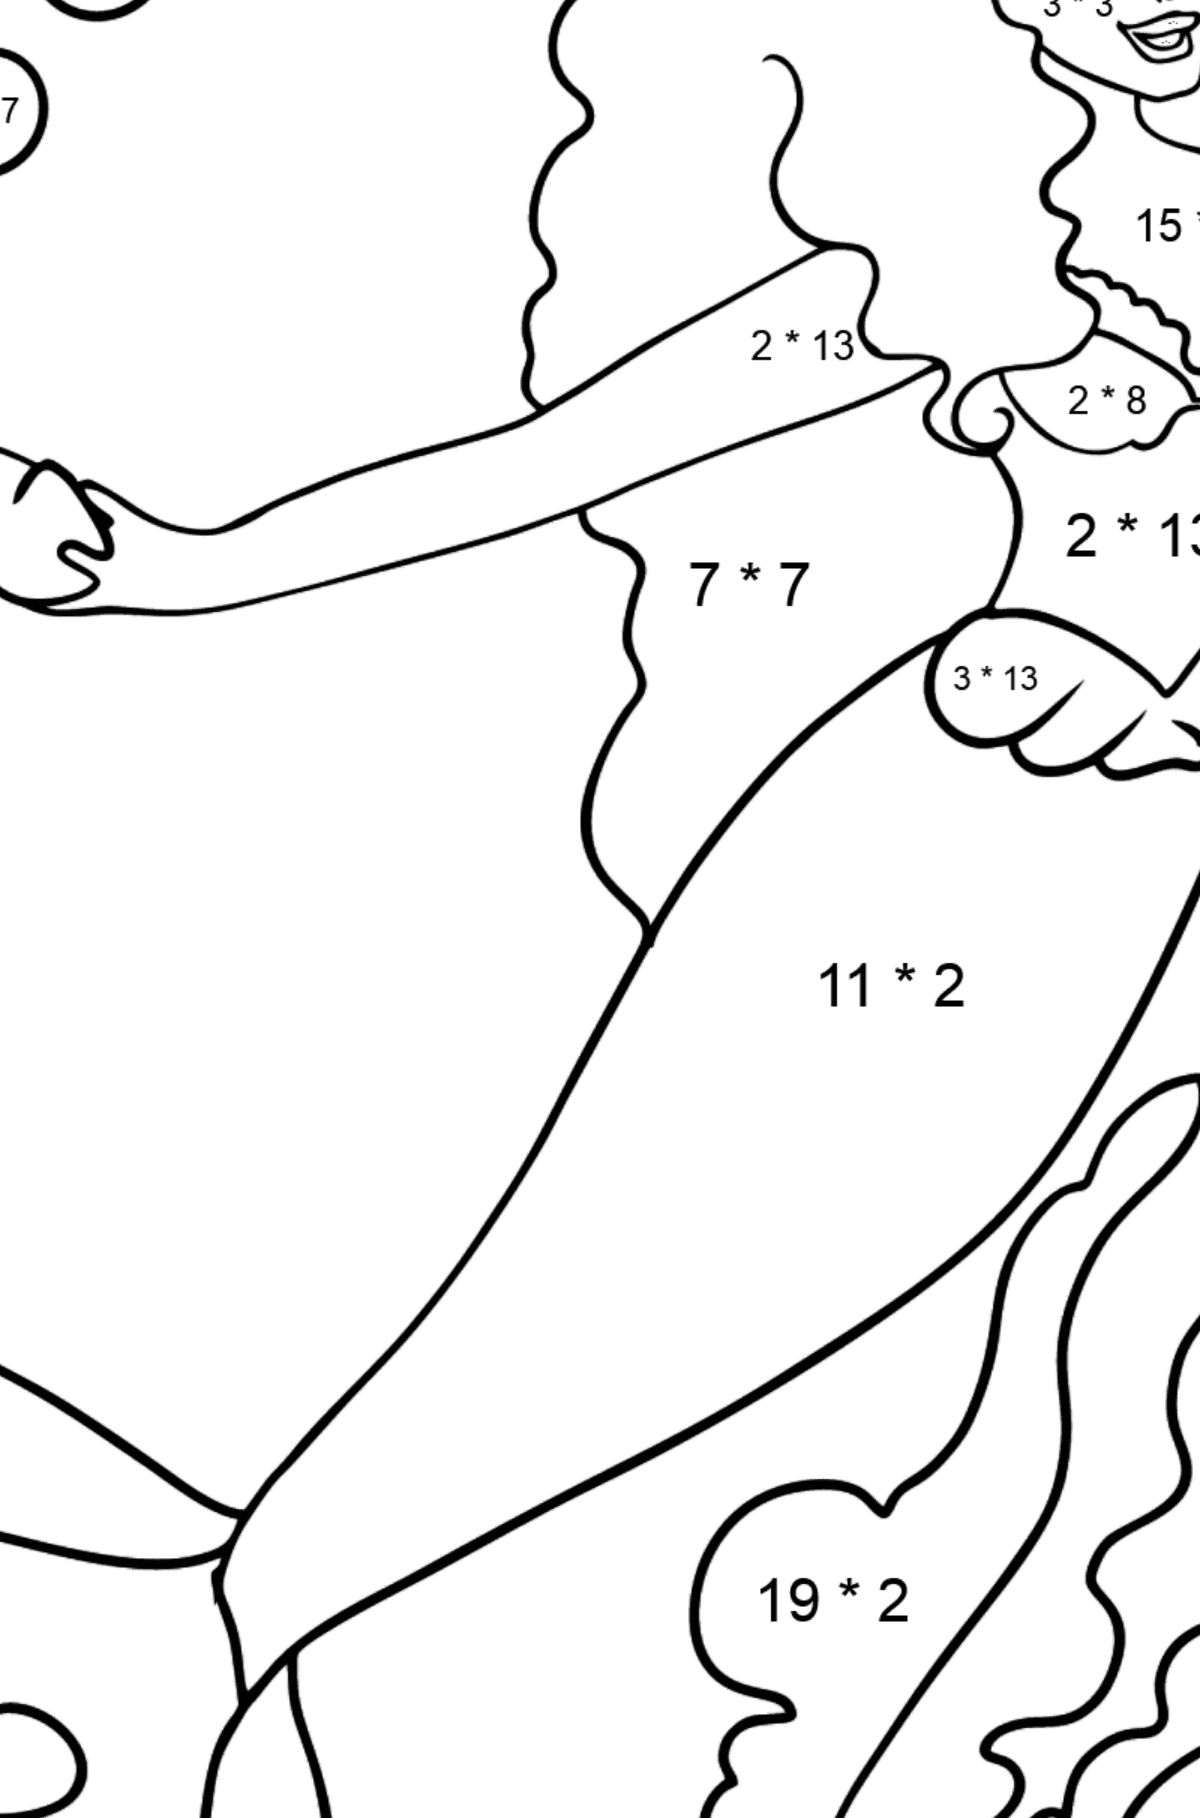 Coloring Page Mermaid and two crabs - Math Coloring - Multiplication for Kids